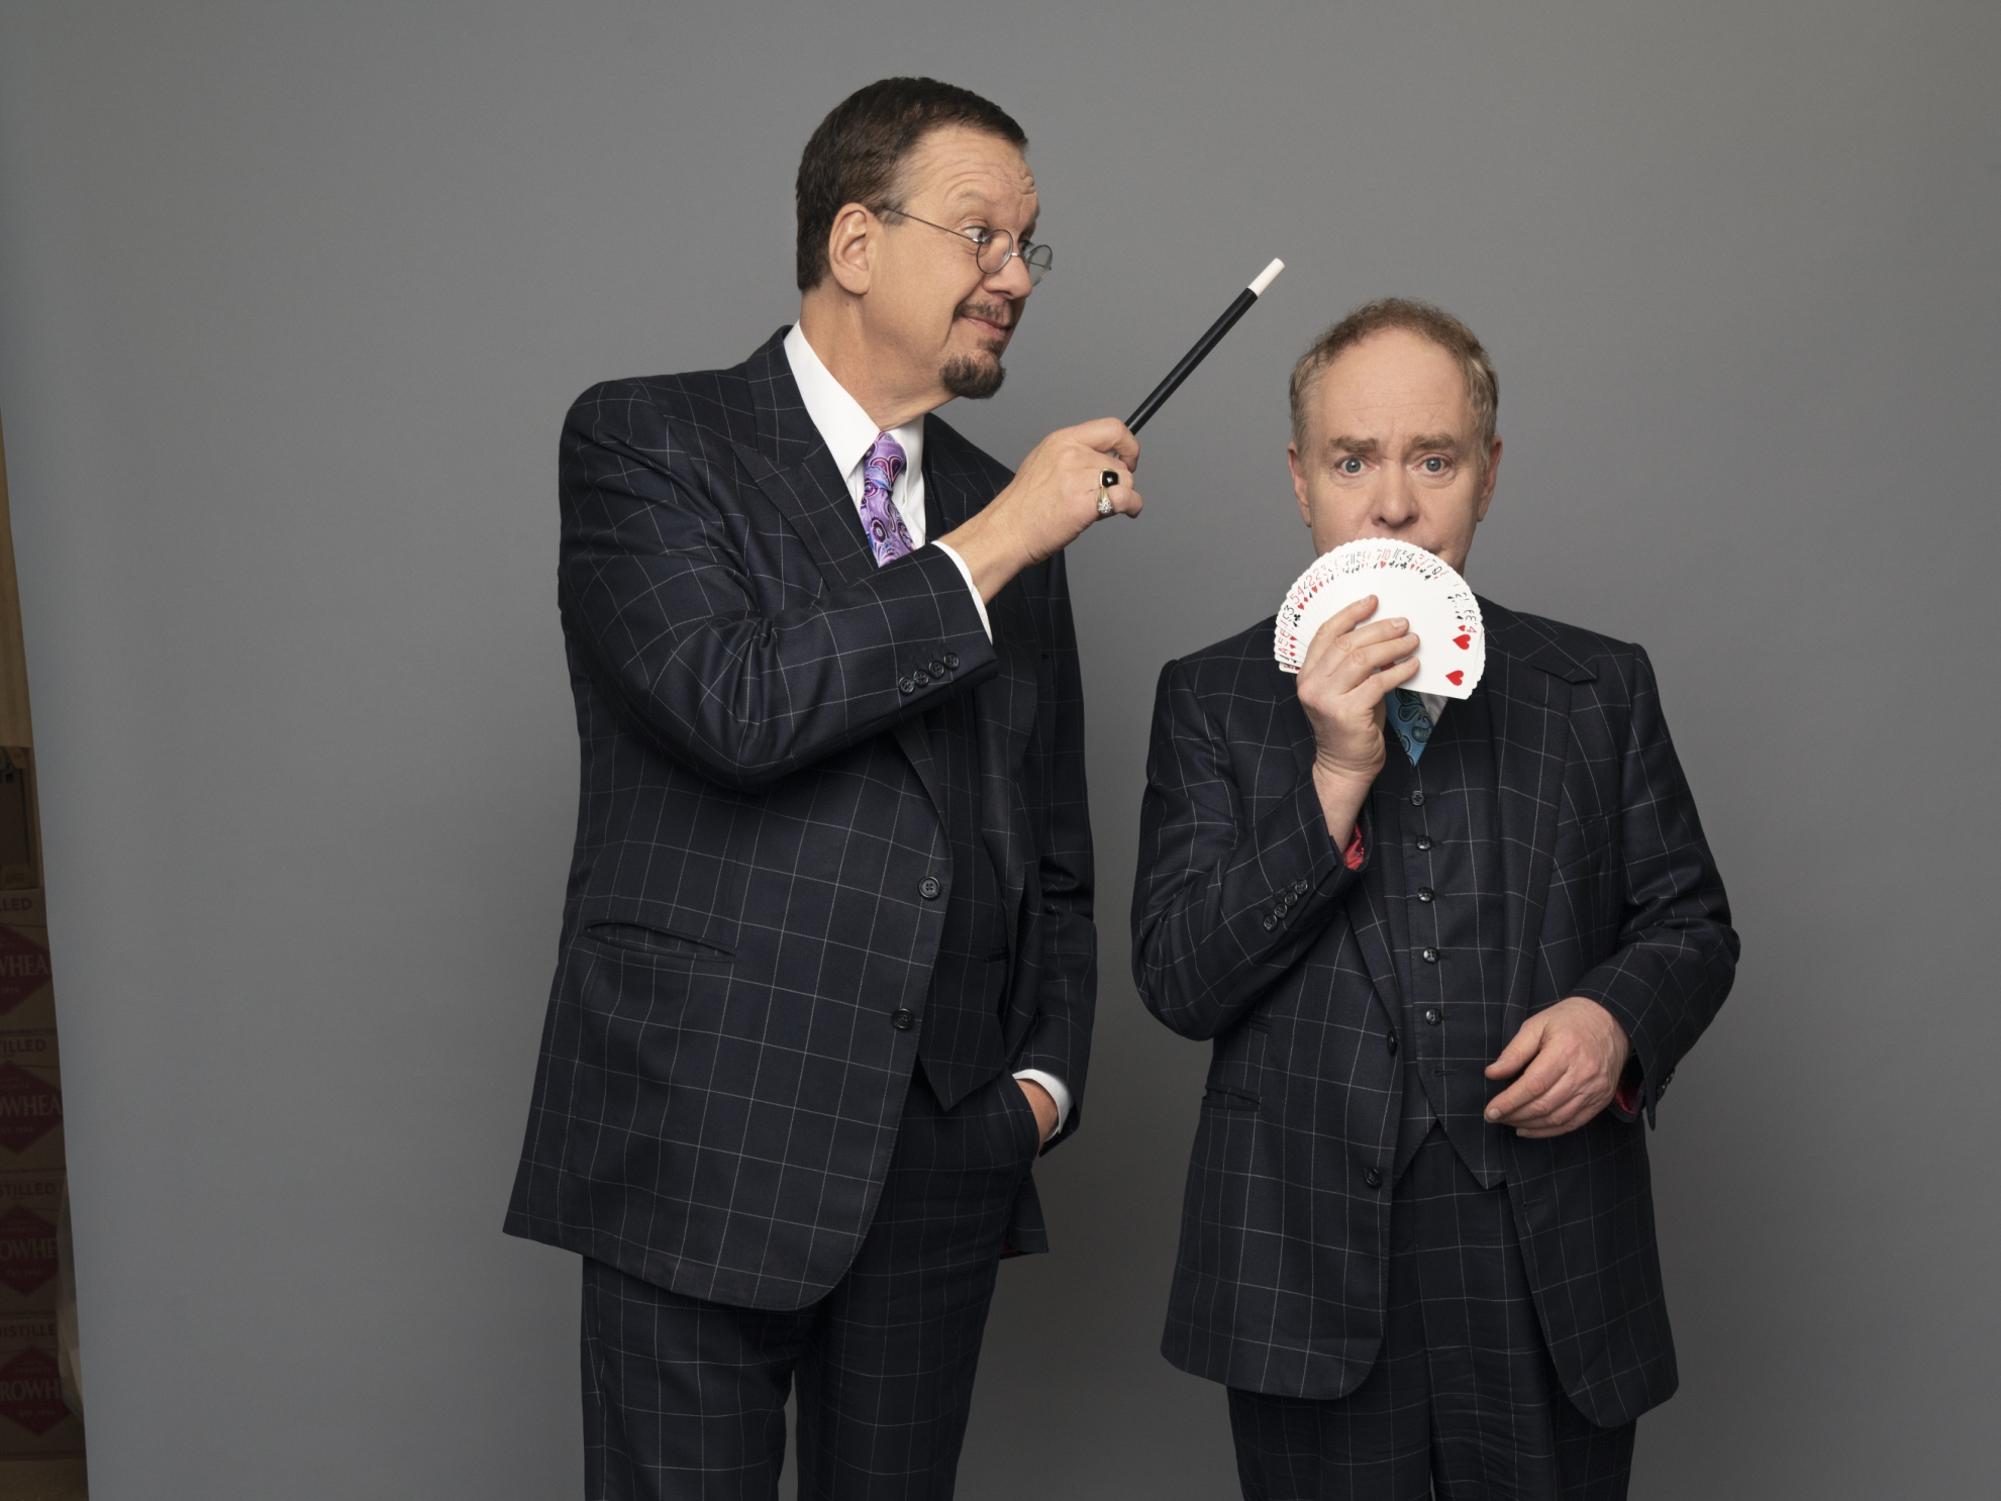 Interview: Penn and Teller on the secret of all magic ahead of